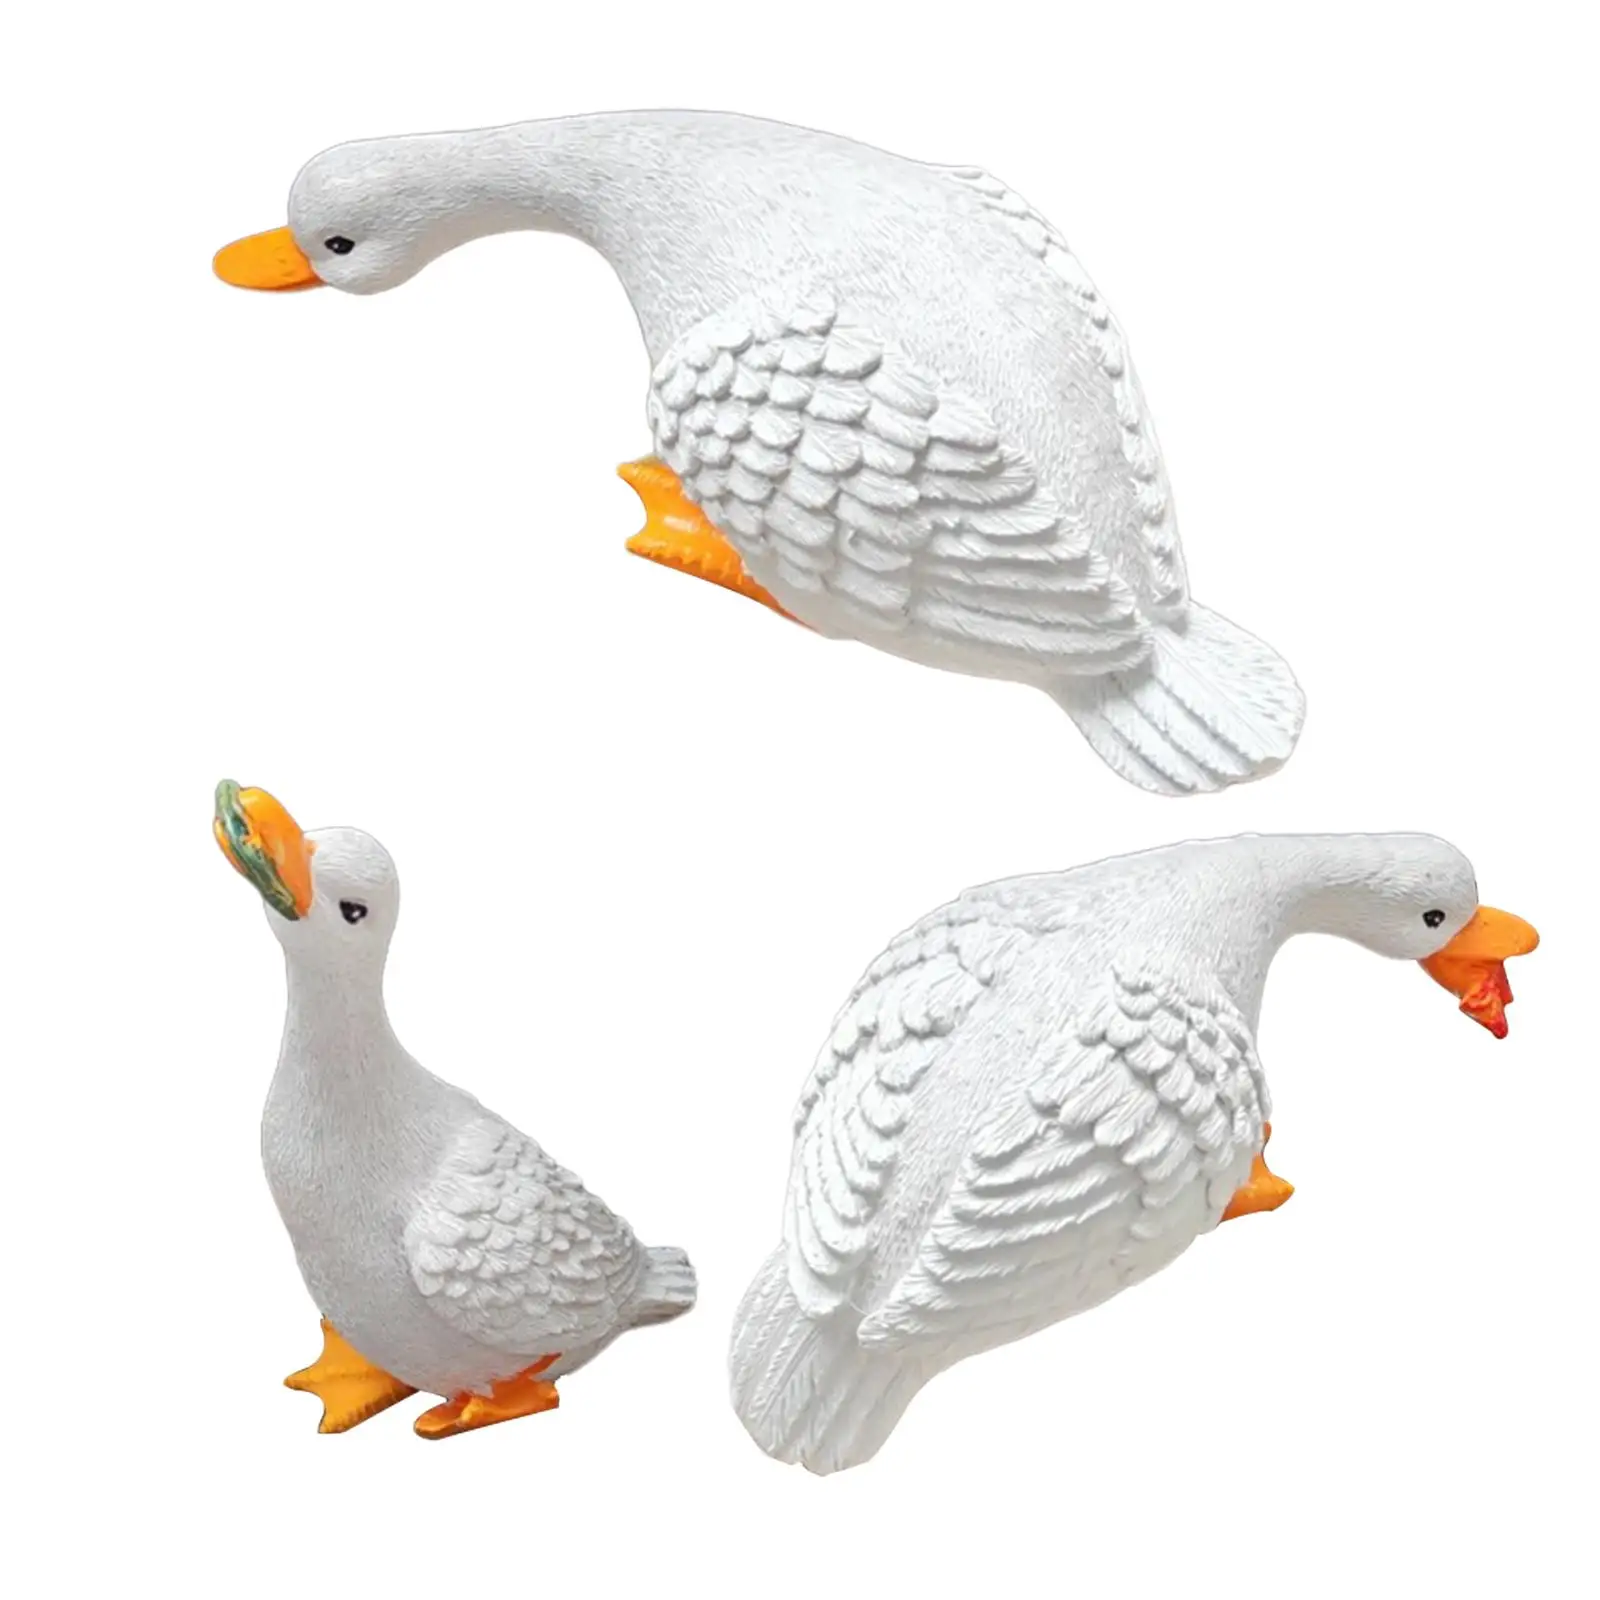 

3 Pieces Outdoor Duck Sculptures Simulation Handpainted Garden Duck Statues for Backyard Flower Bed Balcony Lawn Landscaping